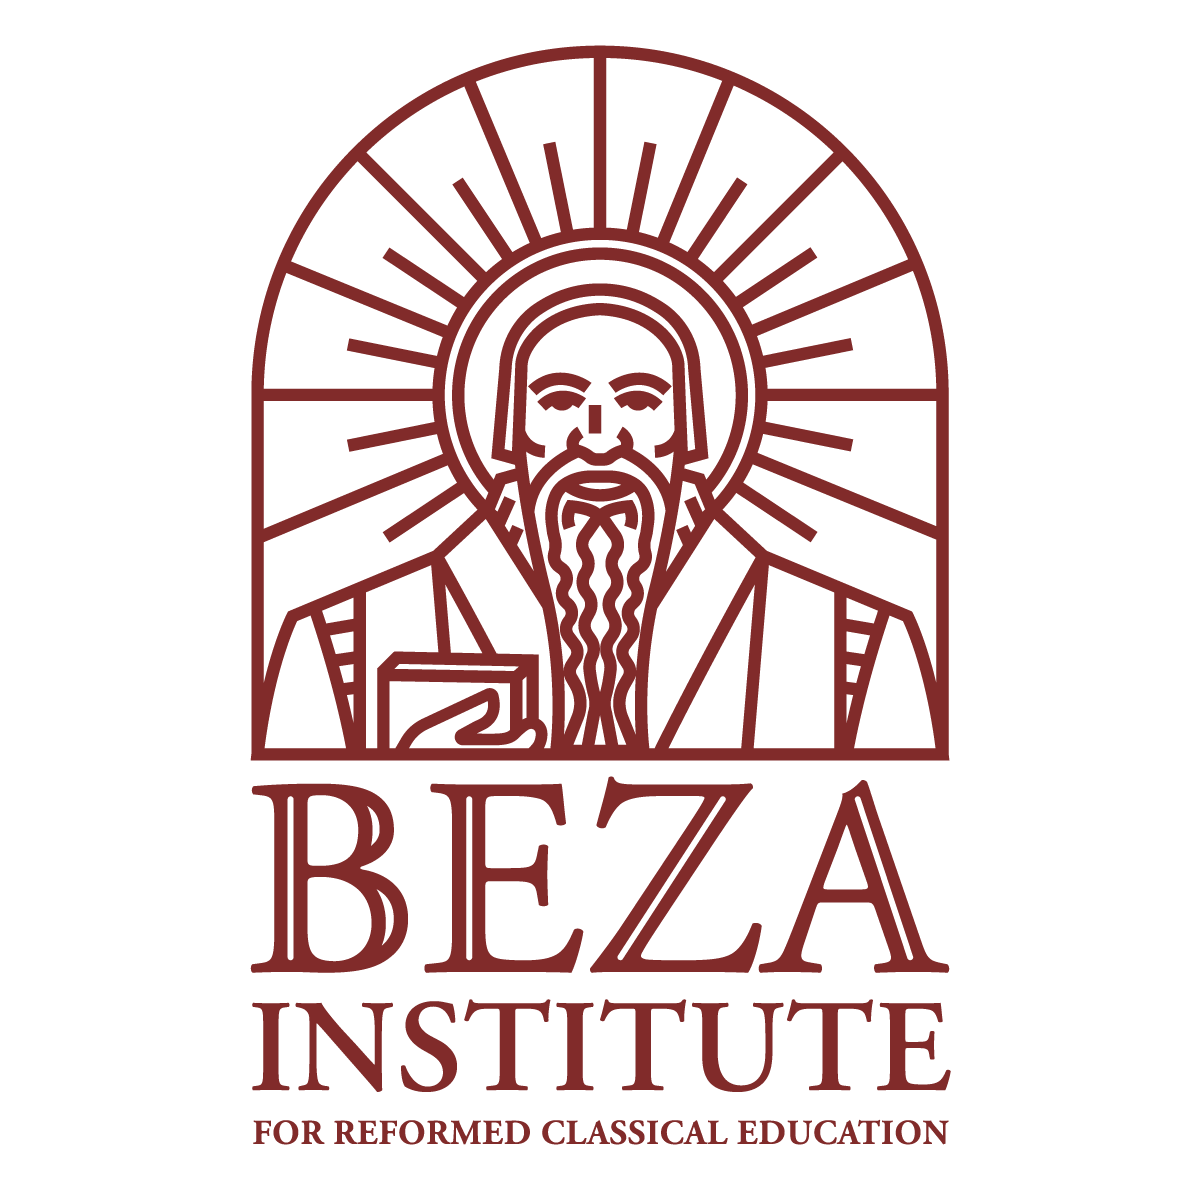 About — Beza Institute for Reformed Classical Education